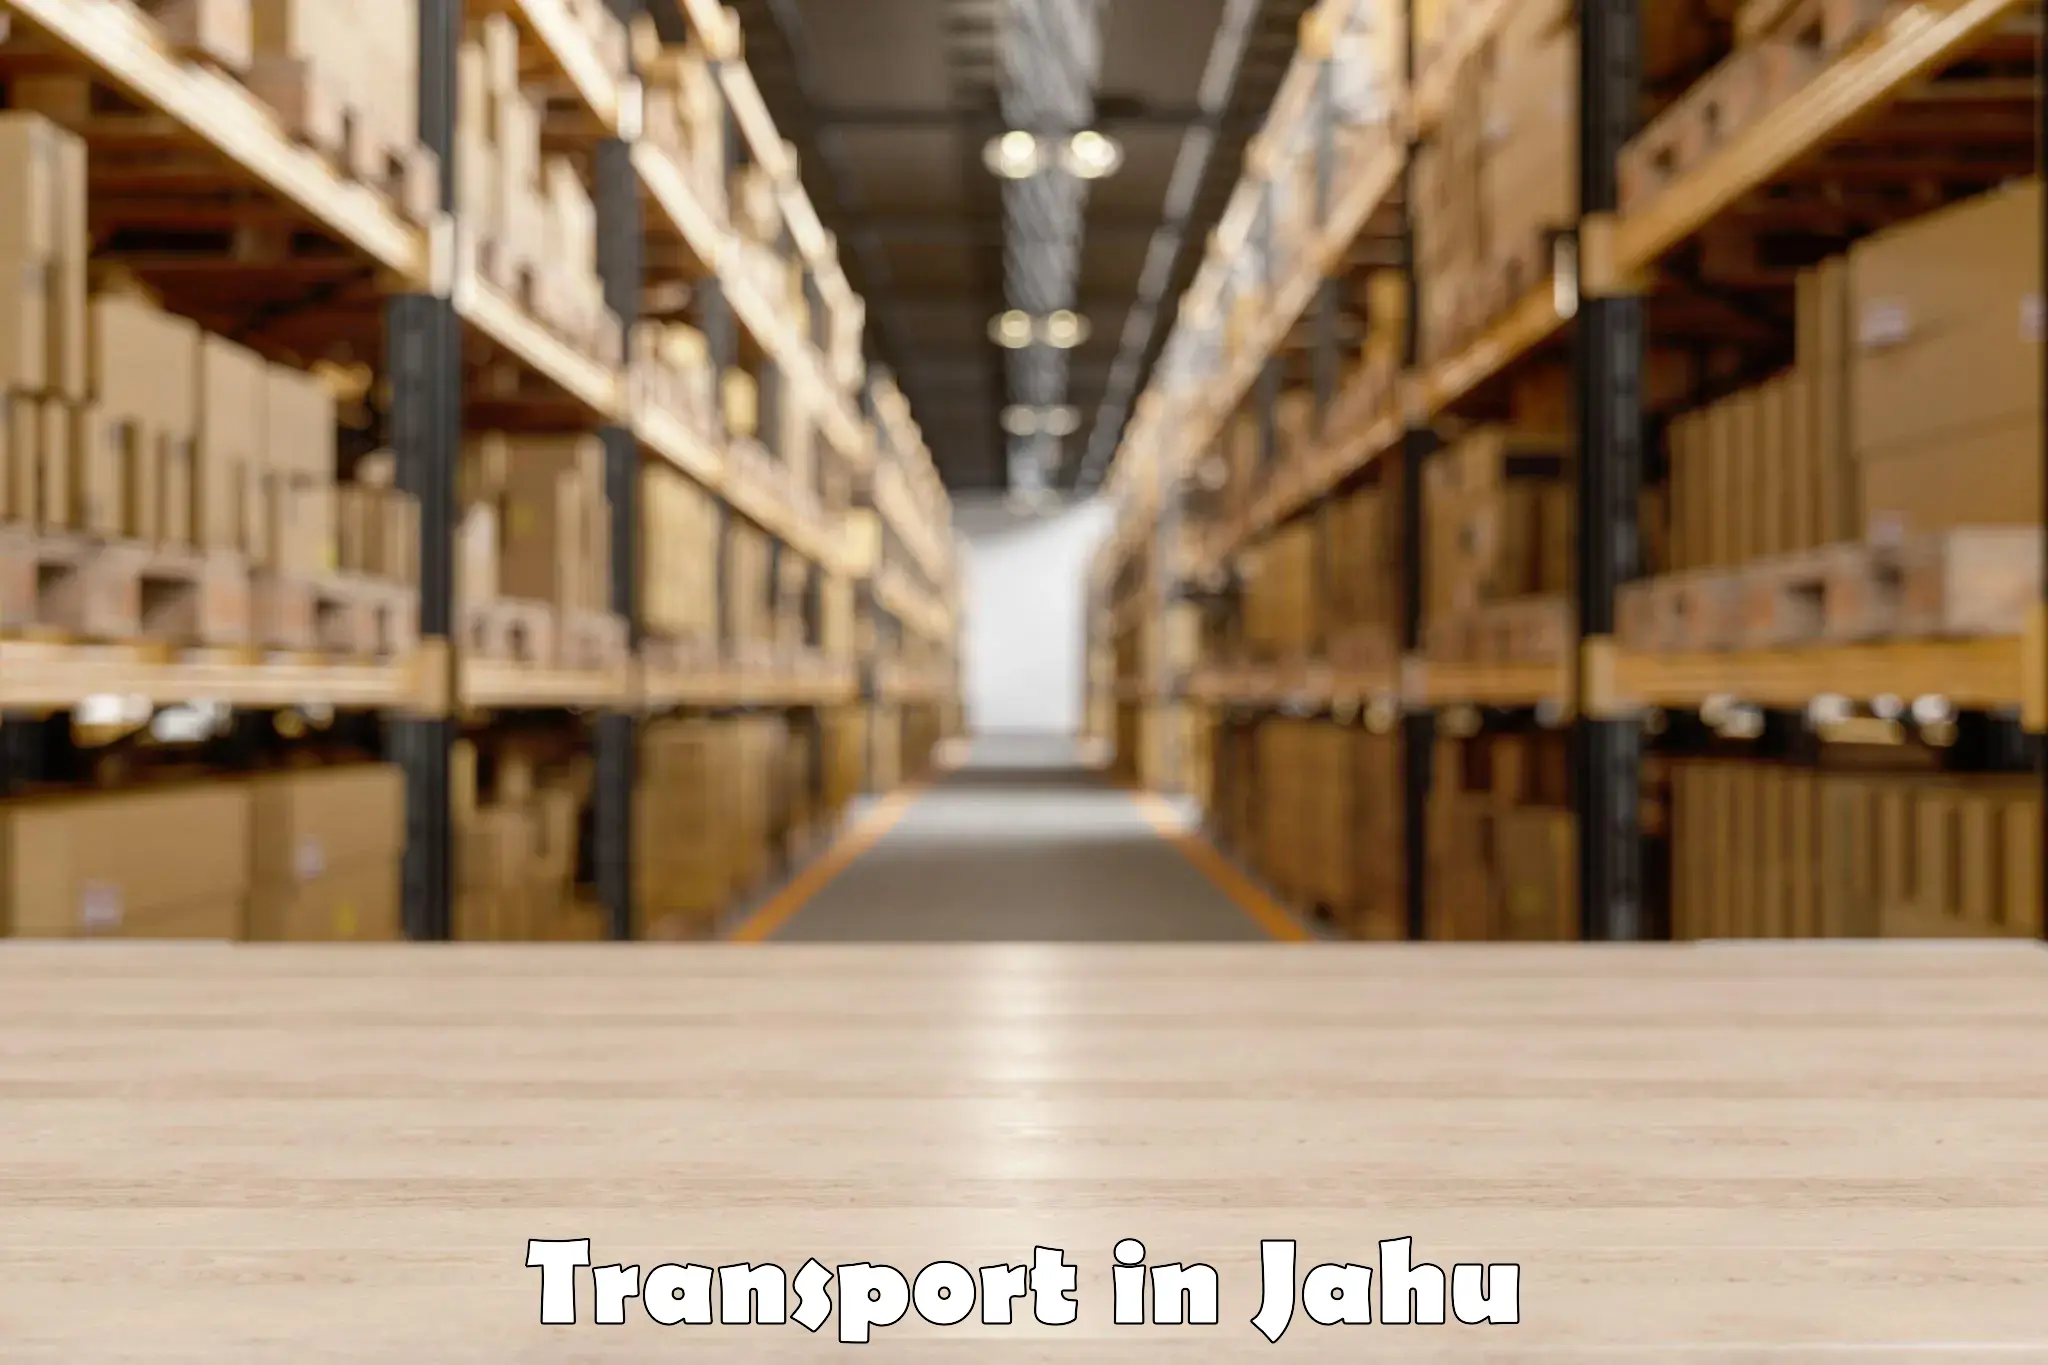 Vehicle transport services in Jahu